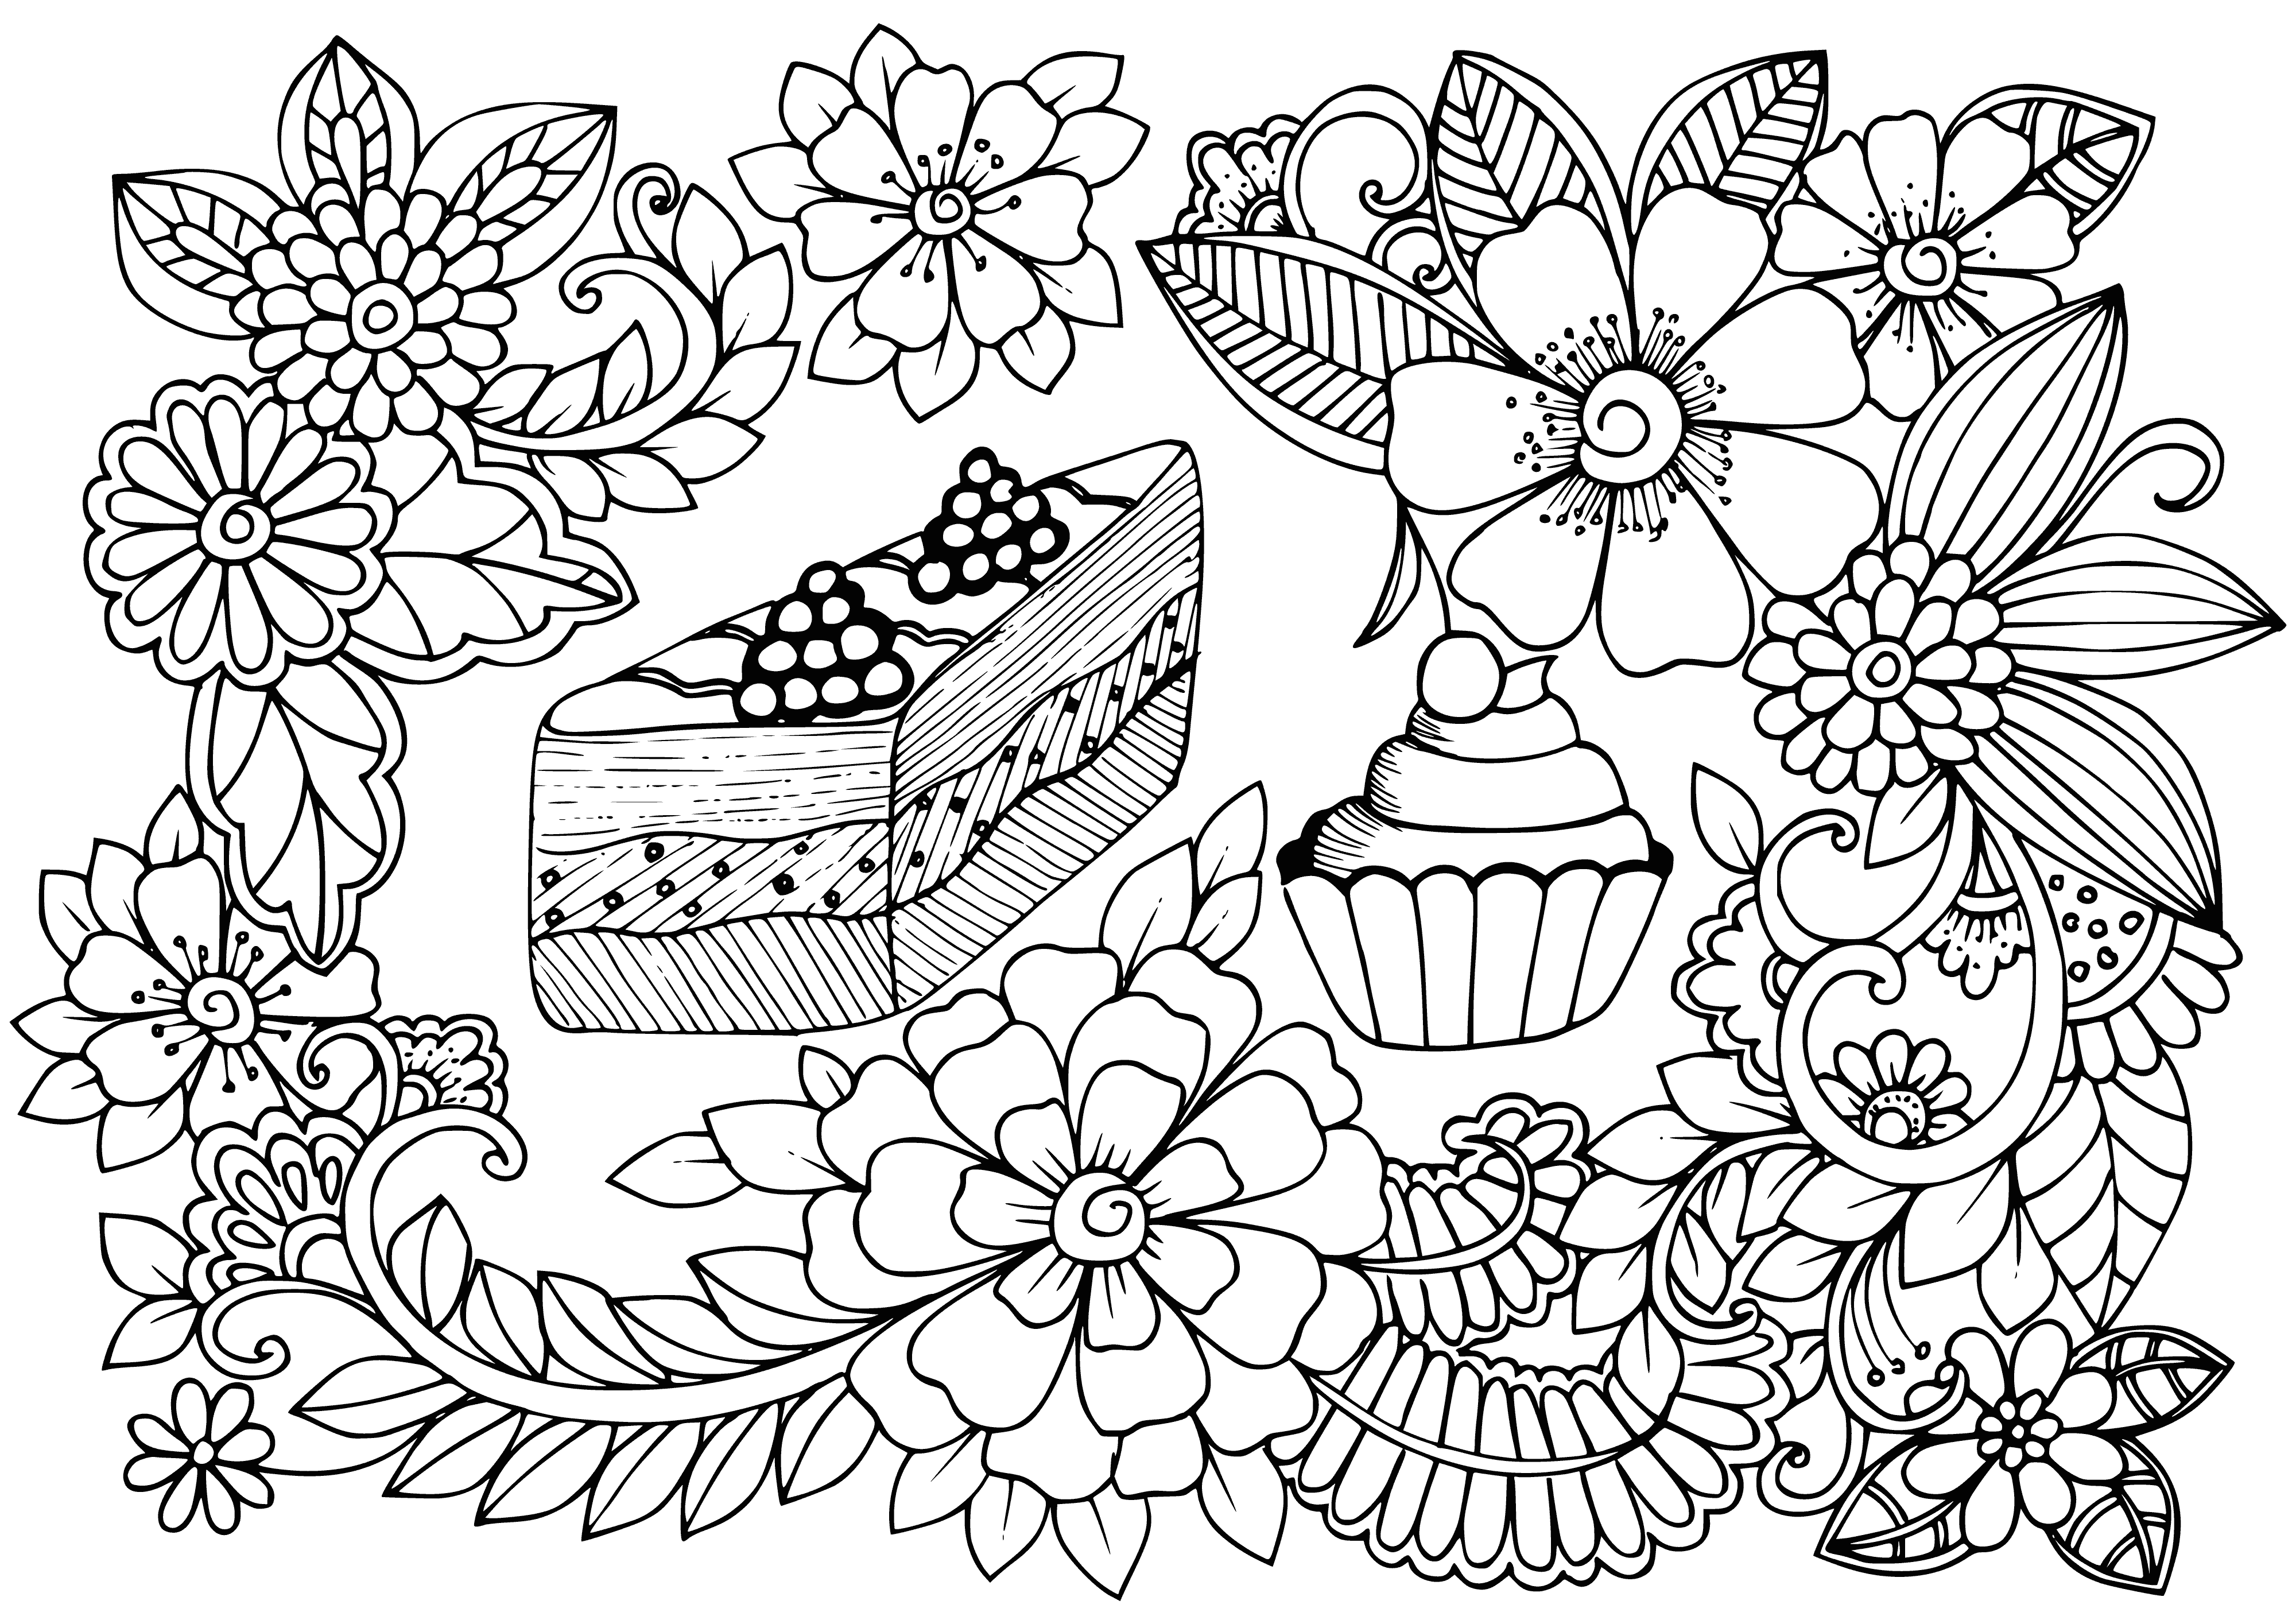 coloring page: Four Adult Coloring pages featuring flowers & dessert: white, pink, purple & blue flowers w/ cake, strawberry, ice cream cone & blueberry pie.